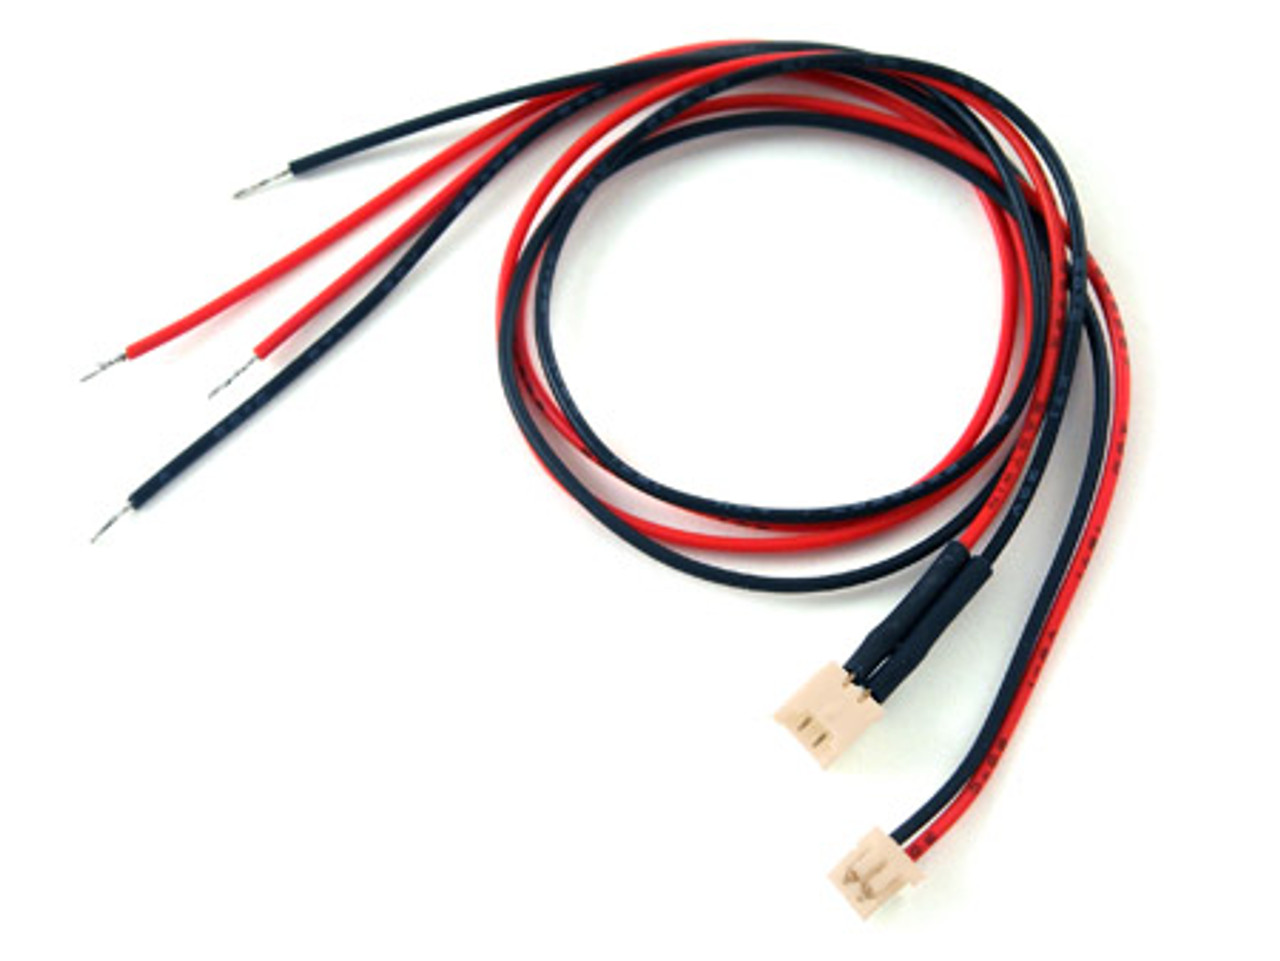 A pair of Molex 51021 2 Pin Female and Male Connector for MCX Batteries